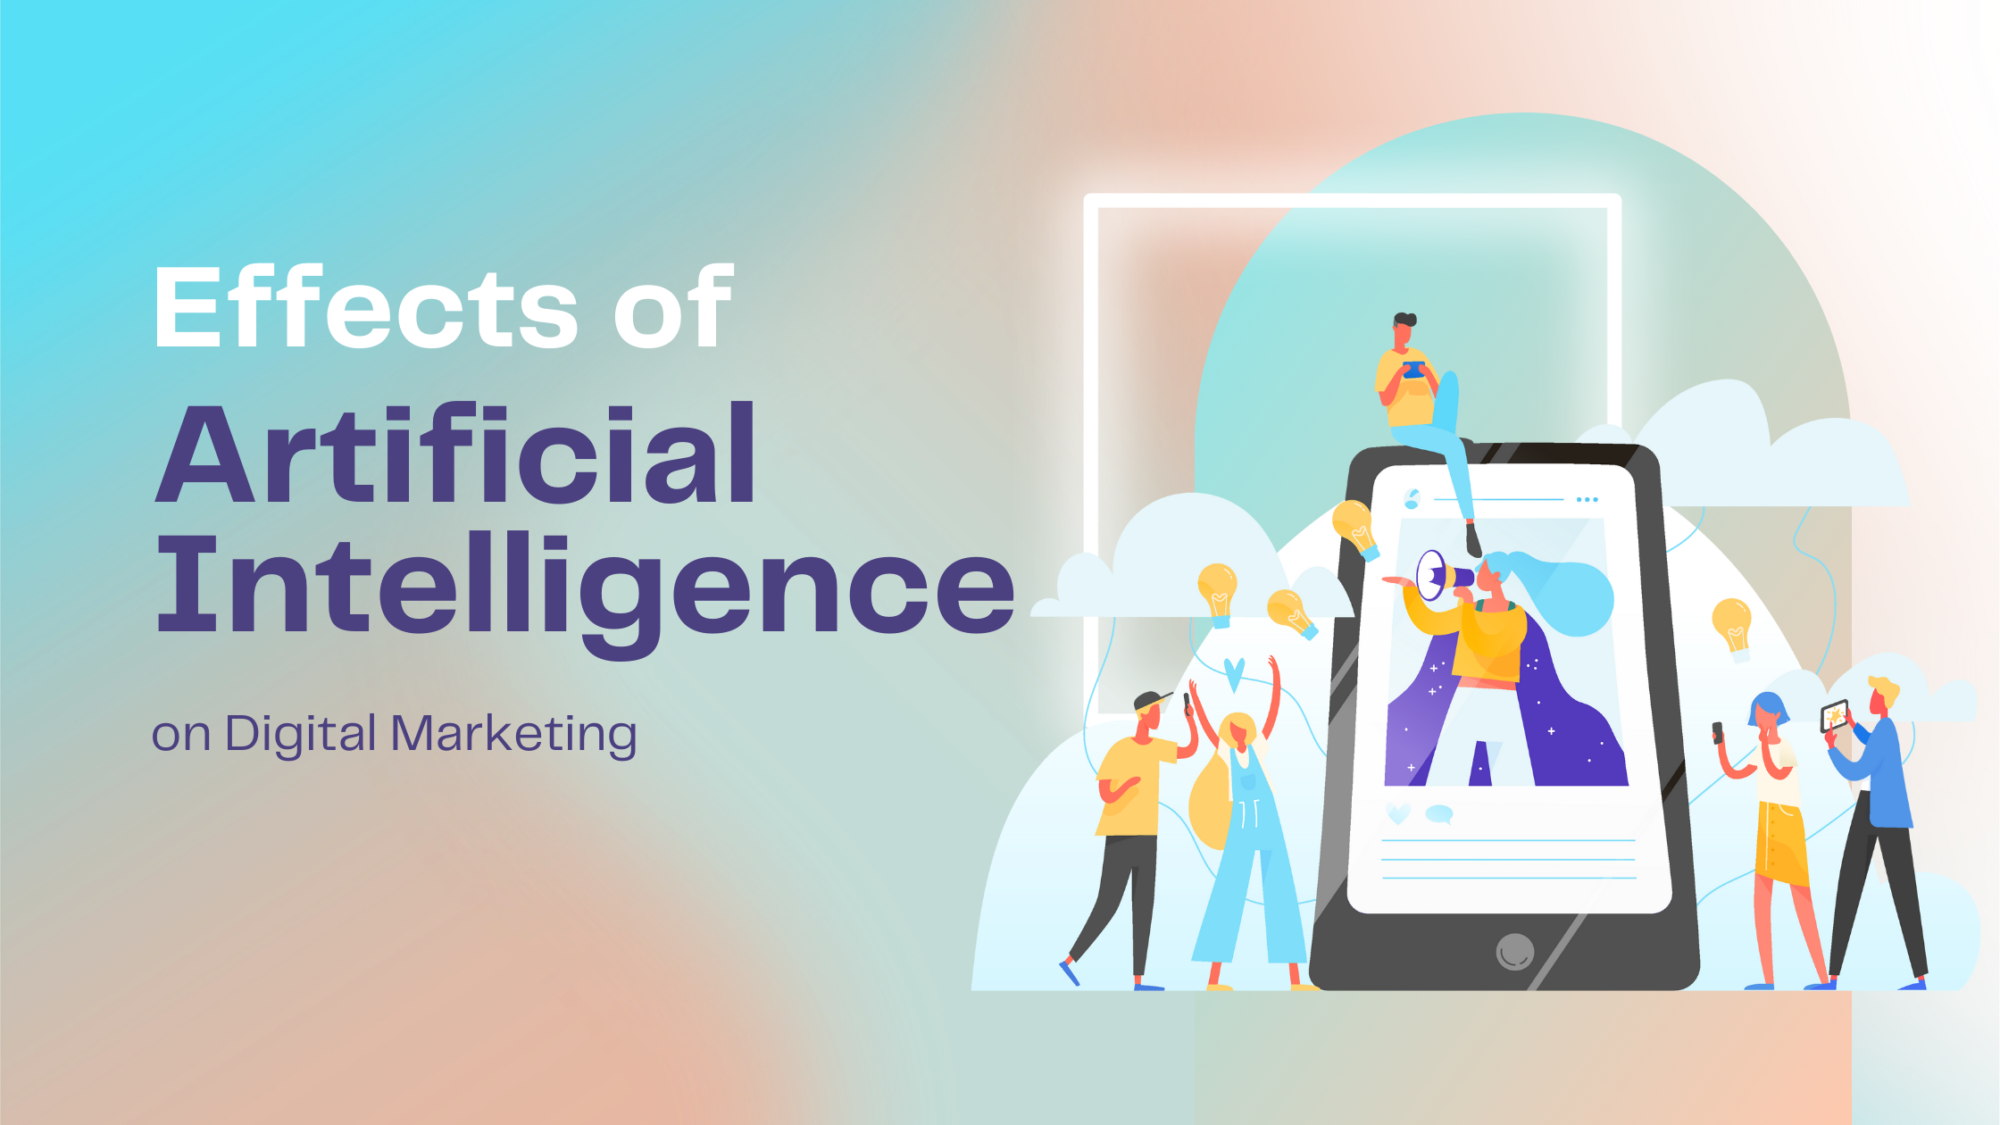 Effects of Artificial Intelligence on Digital Marketing